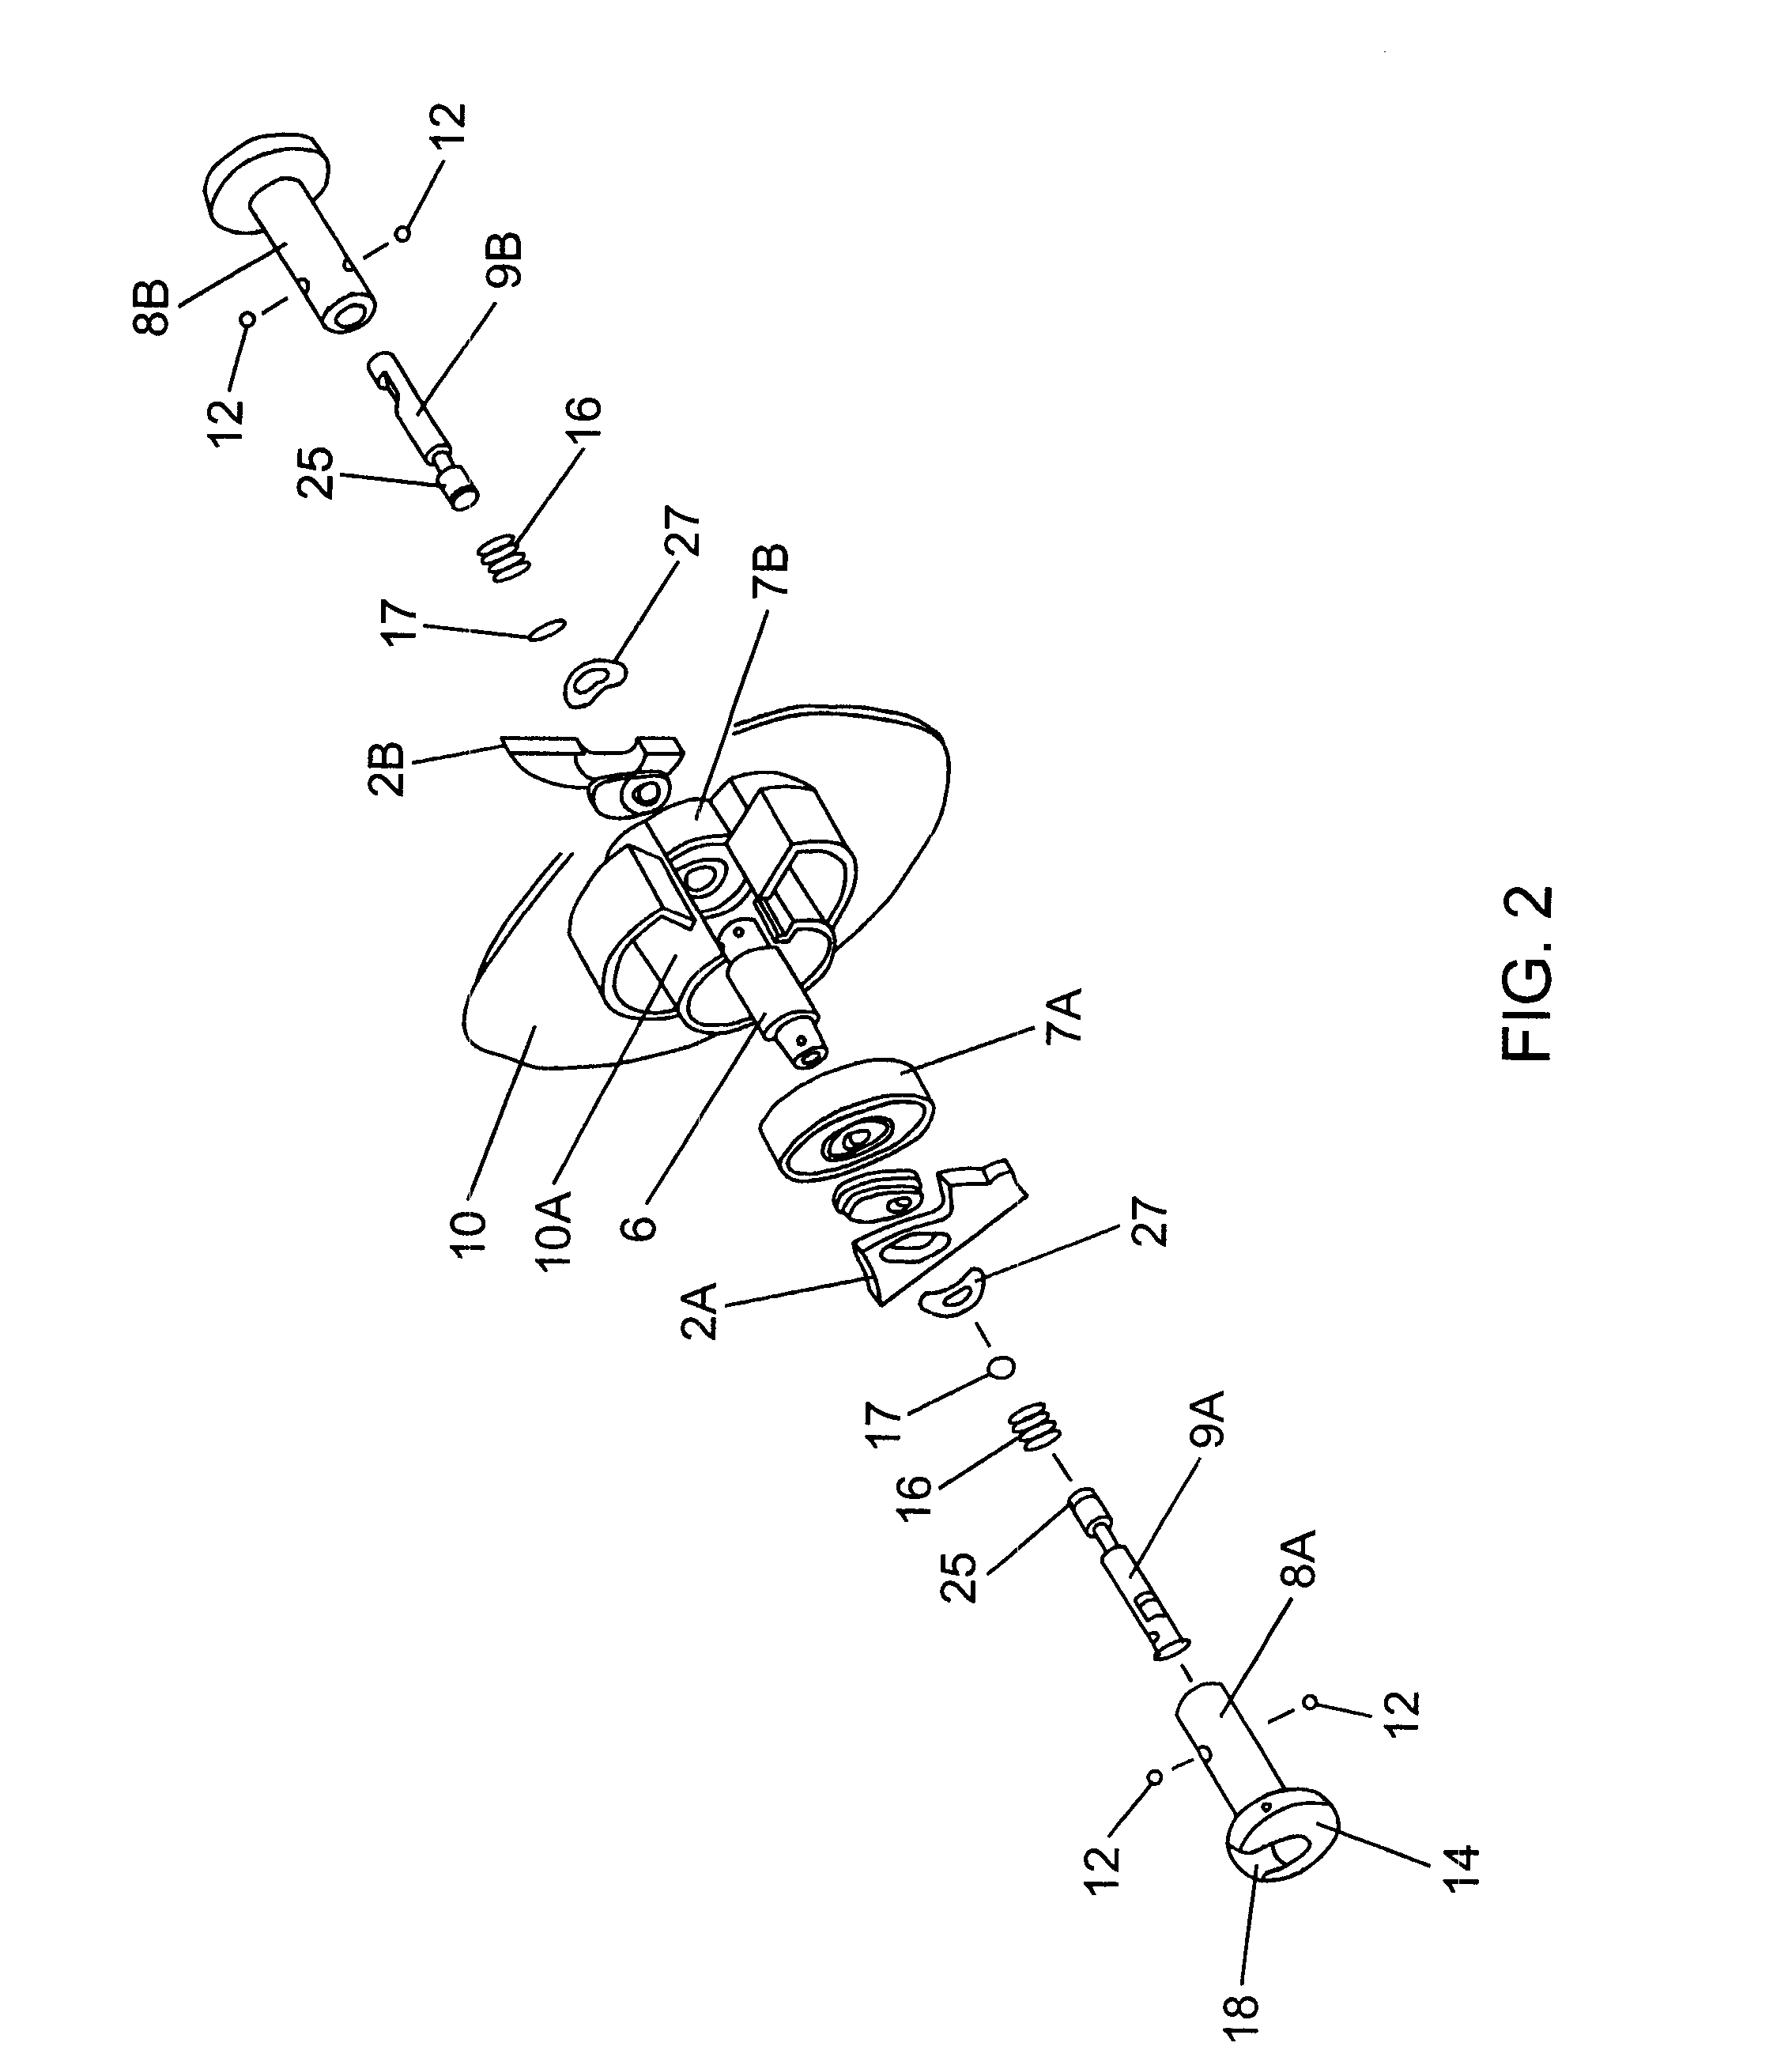 In-line roller skates having quick-release axle system with safety retaining pin mechanism